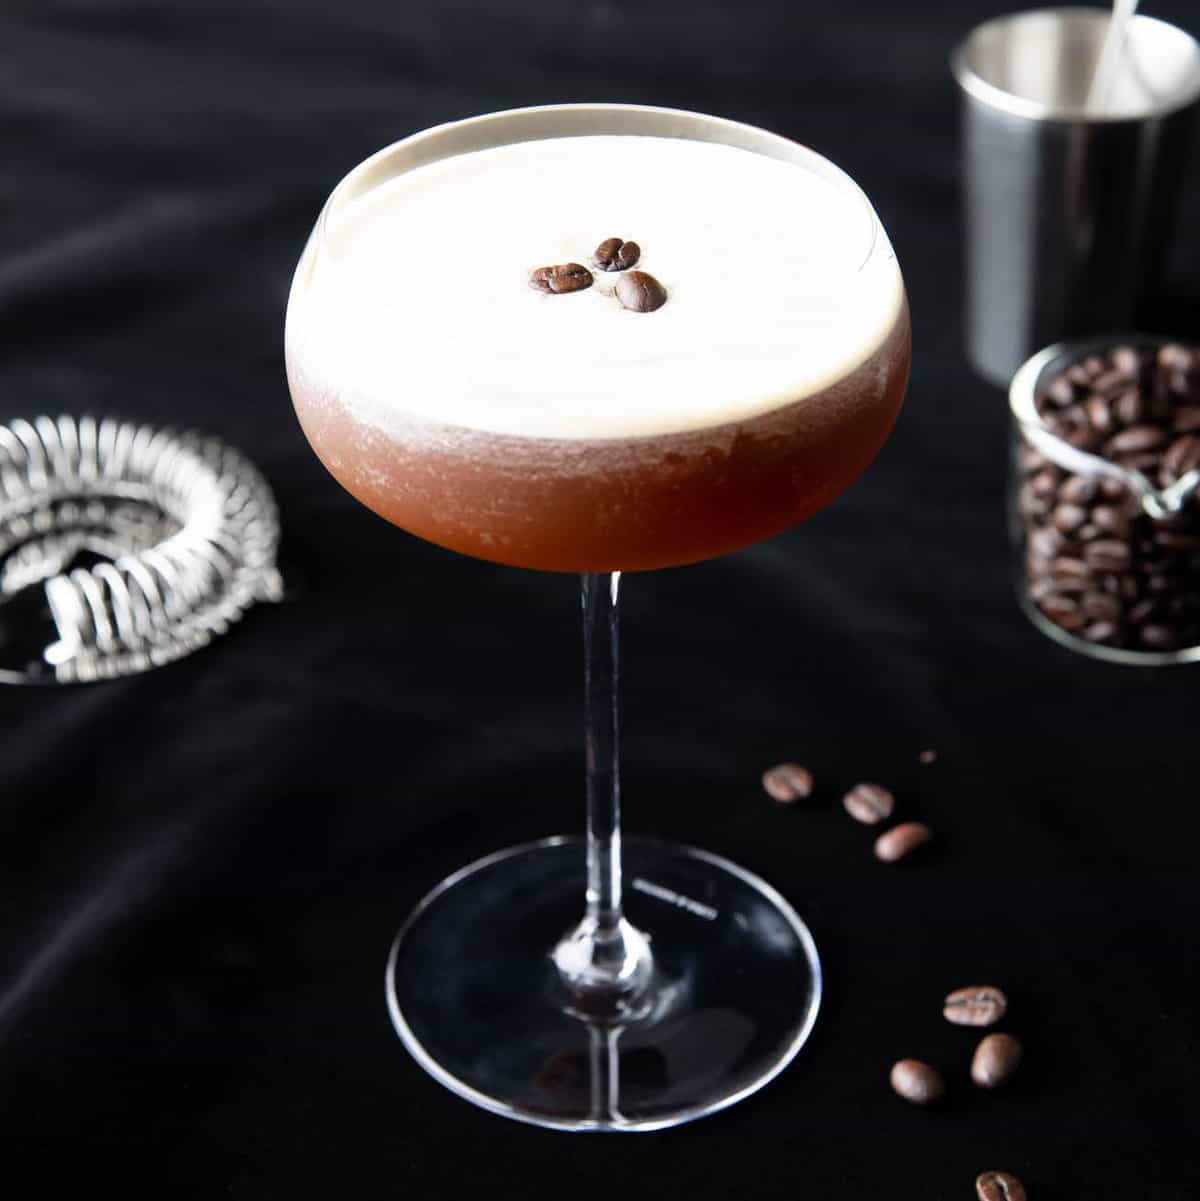 Coffee Martini topped with froth and three espresso beans